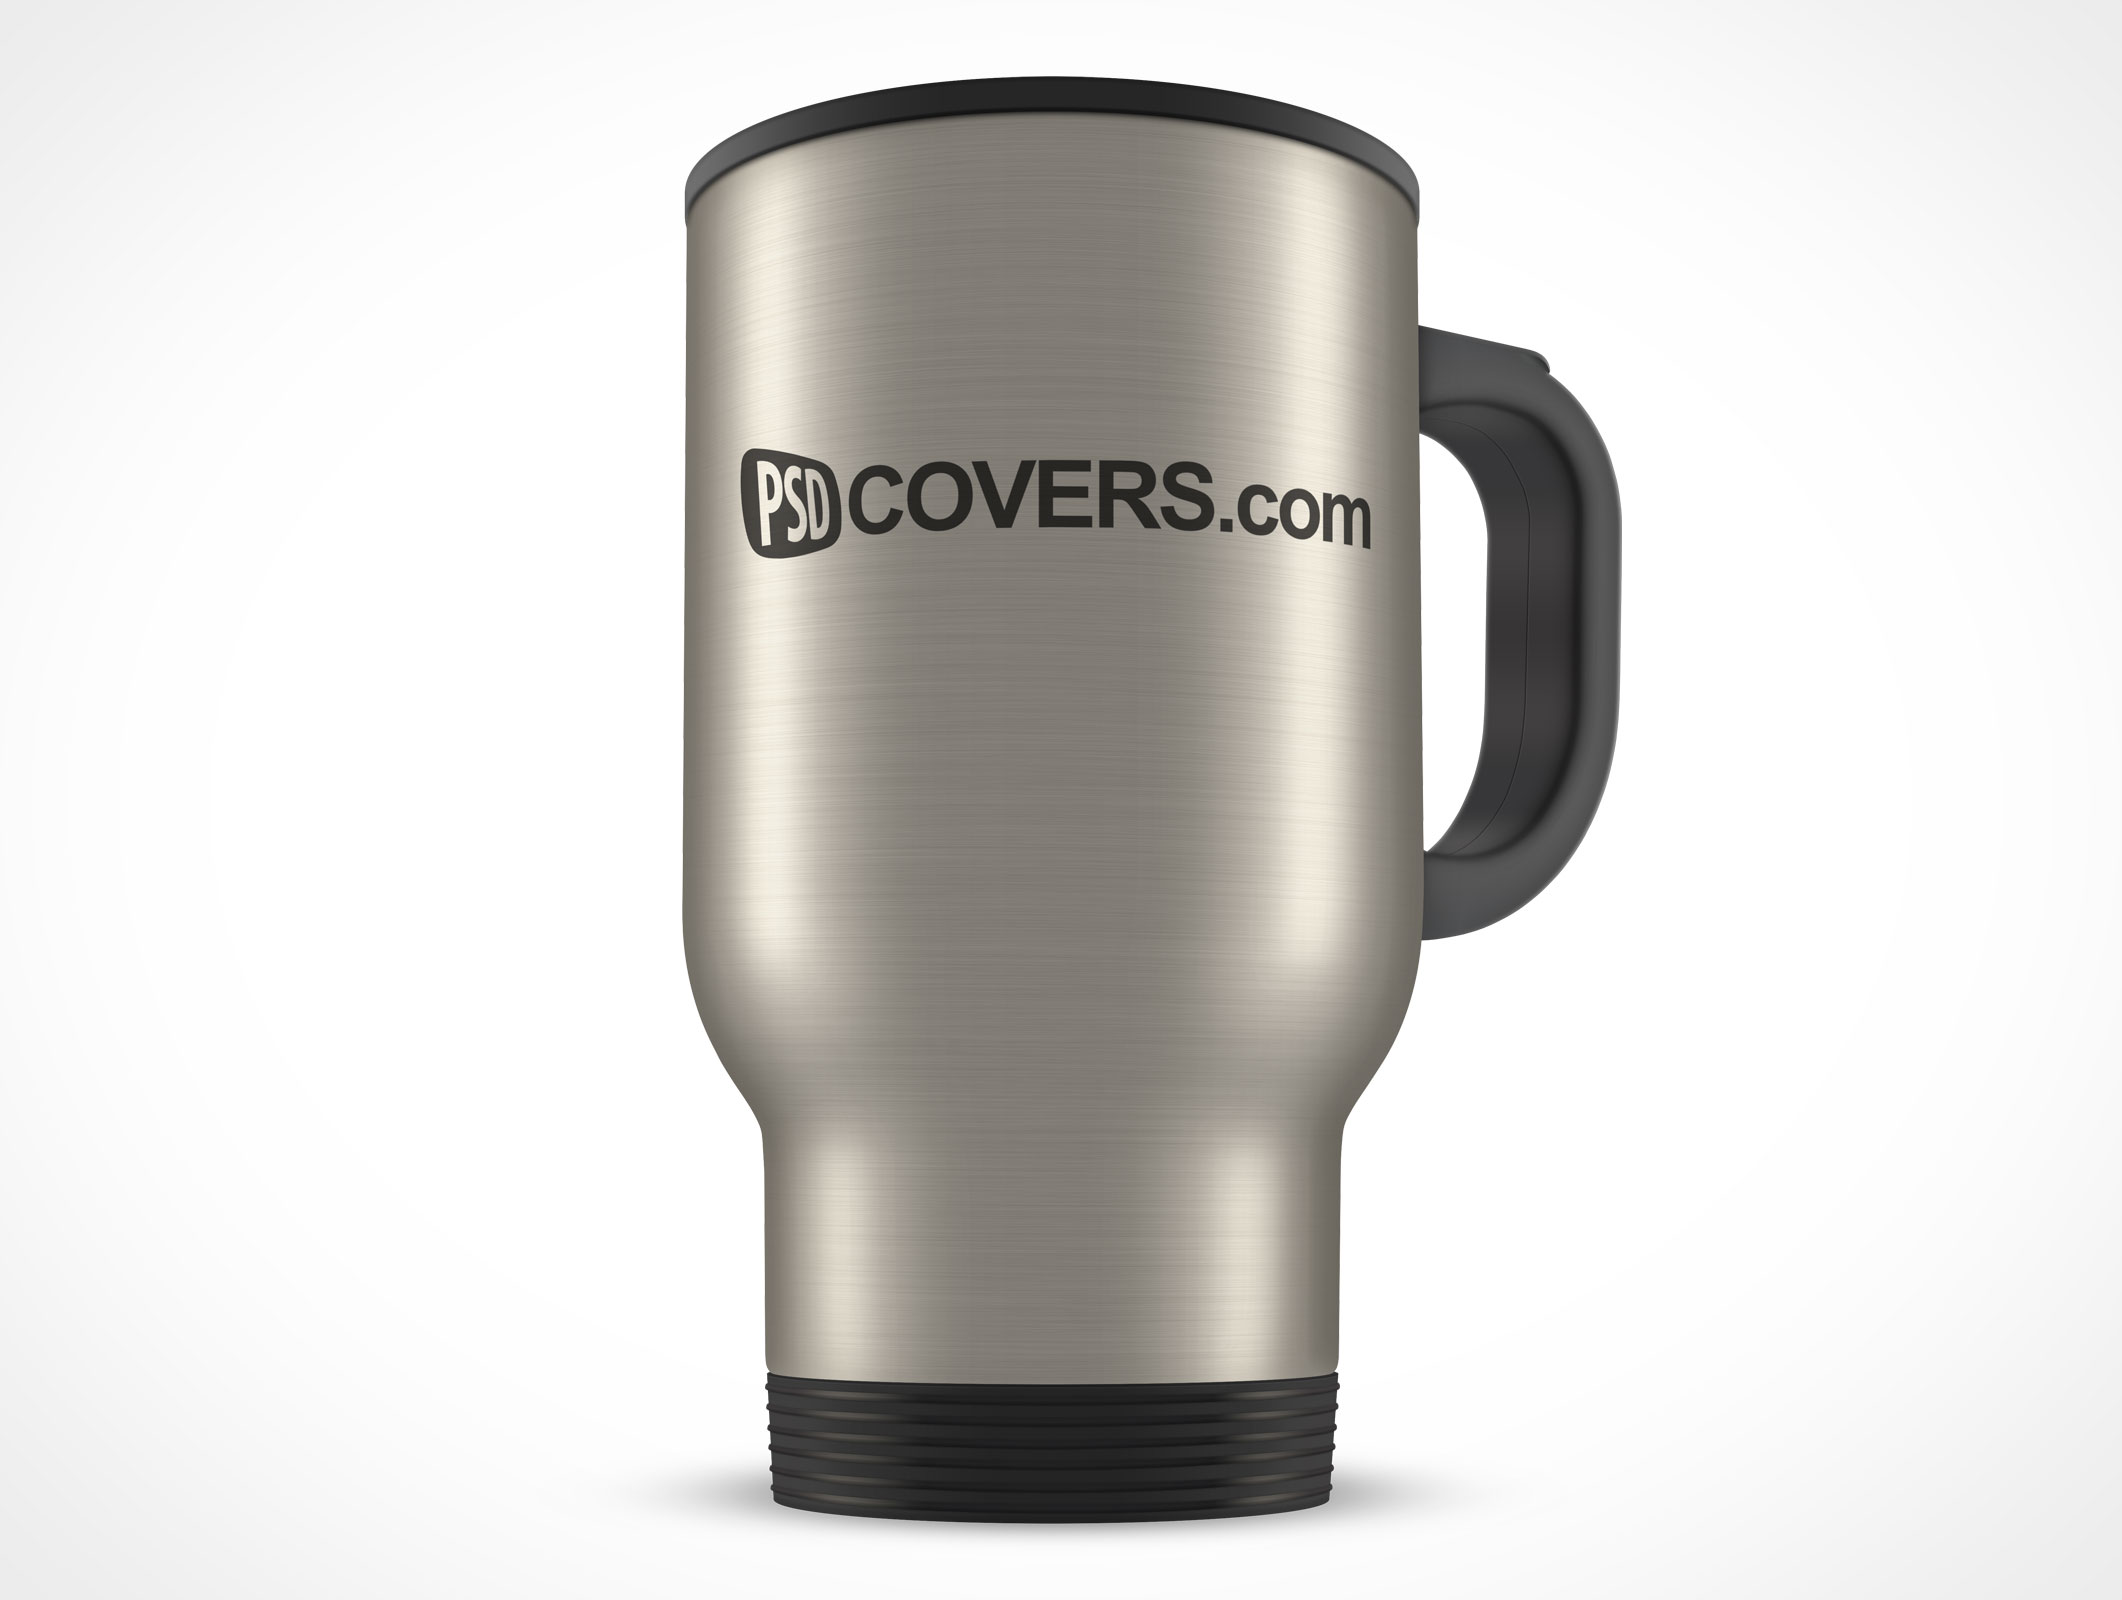 Download Mug With In Mockup Psdcovers